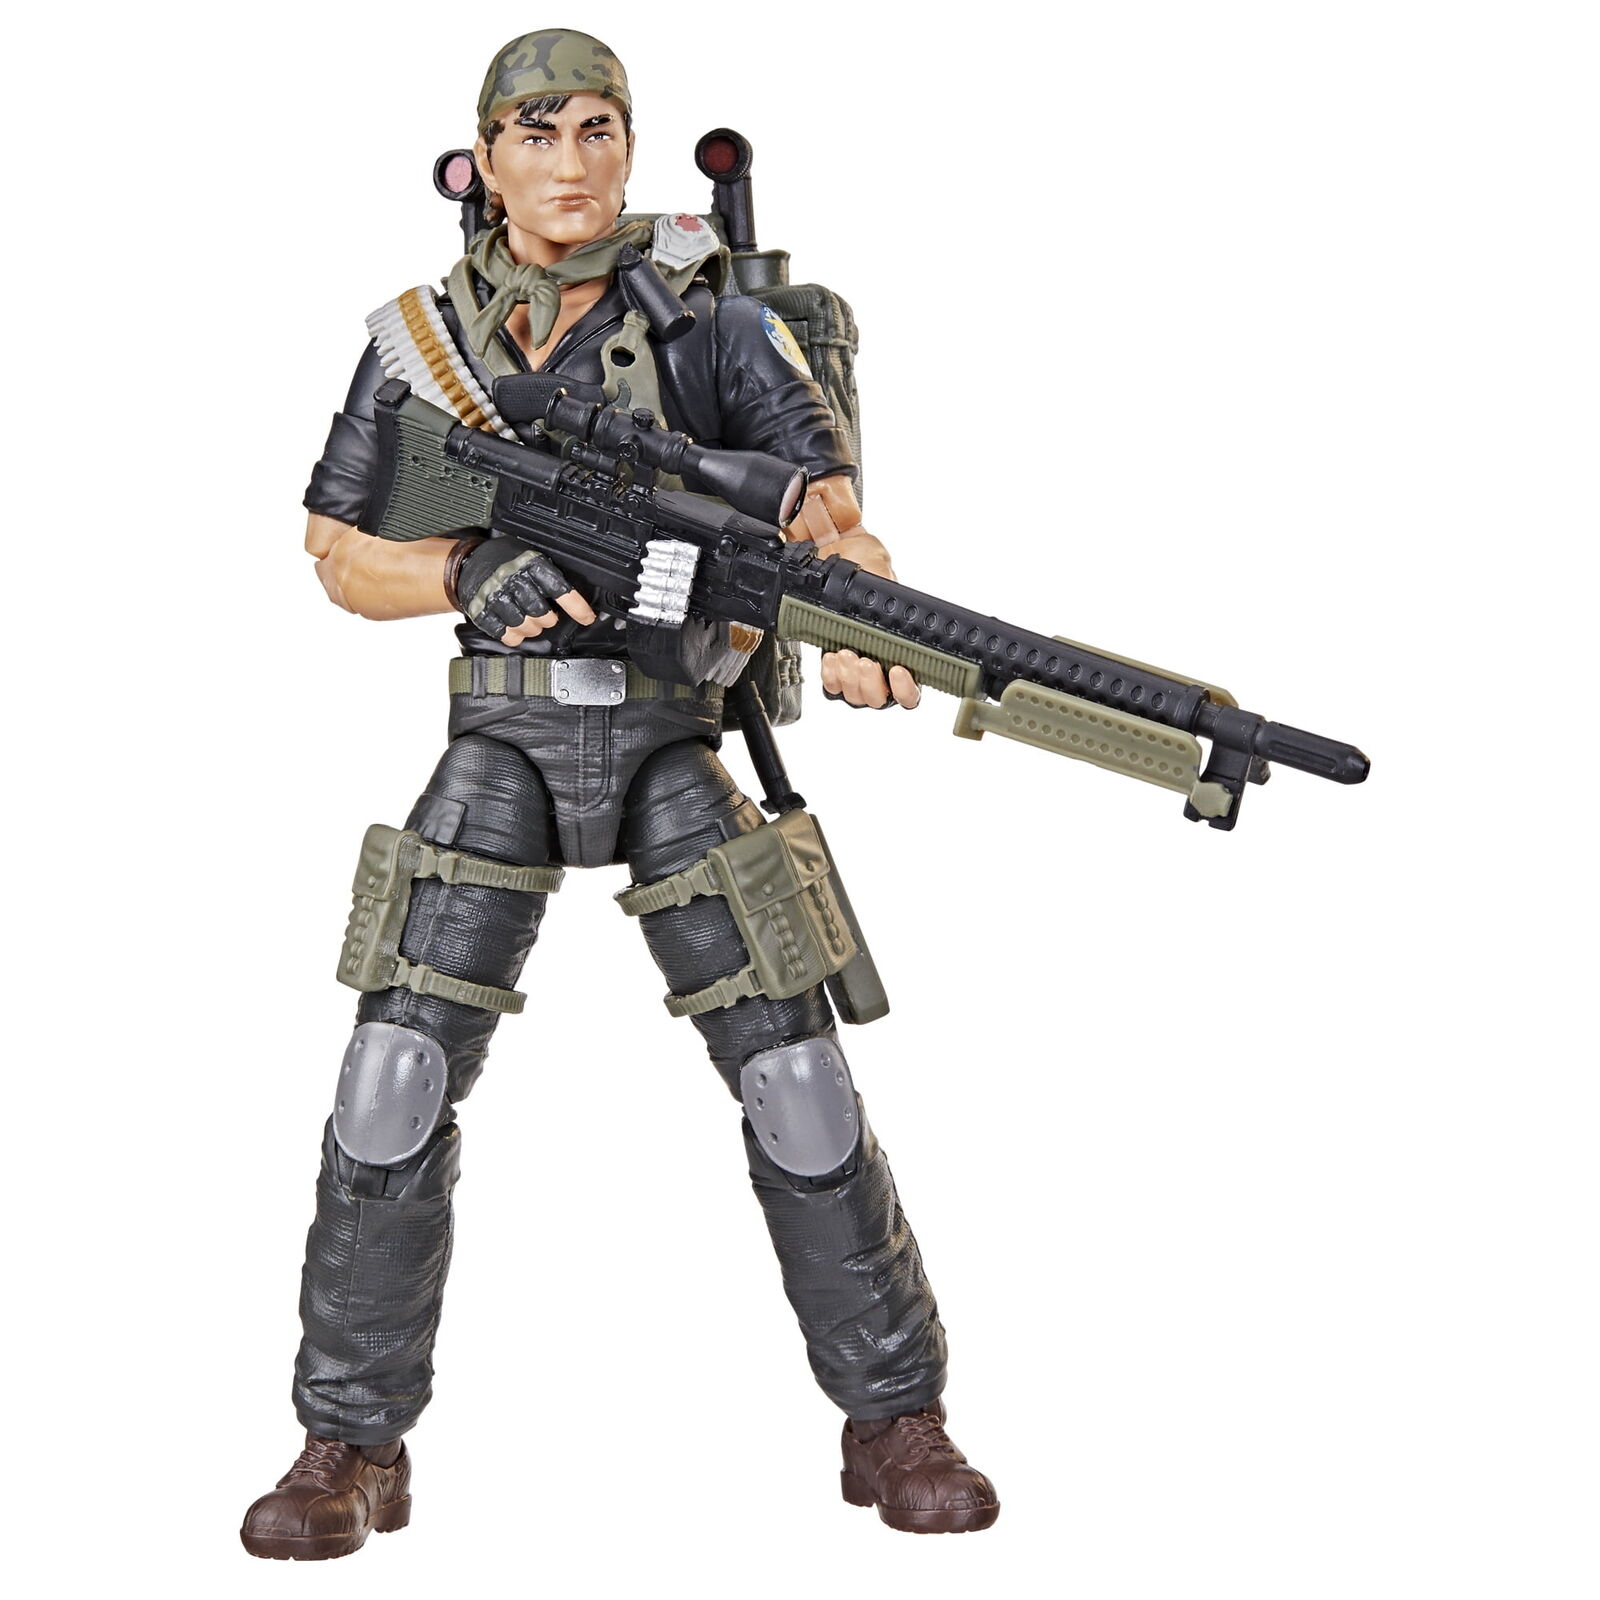 Classified Series Night Force Tunnel Rat Collectible Kids Toy Action Figure